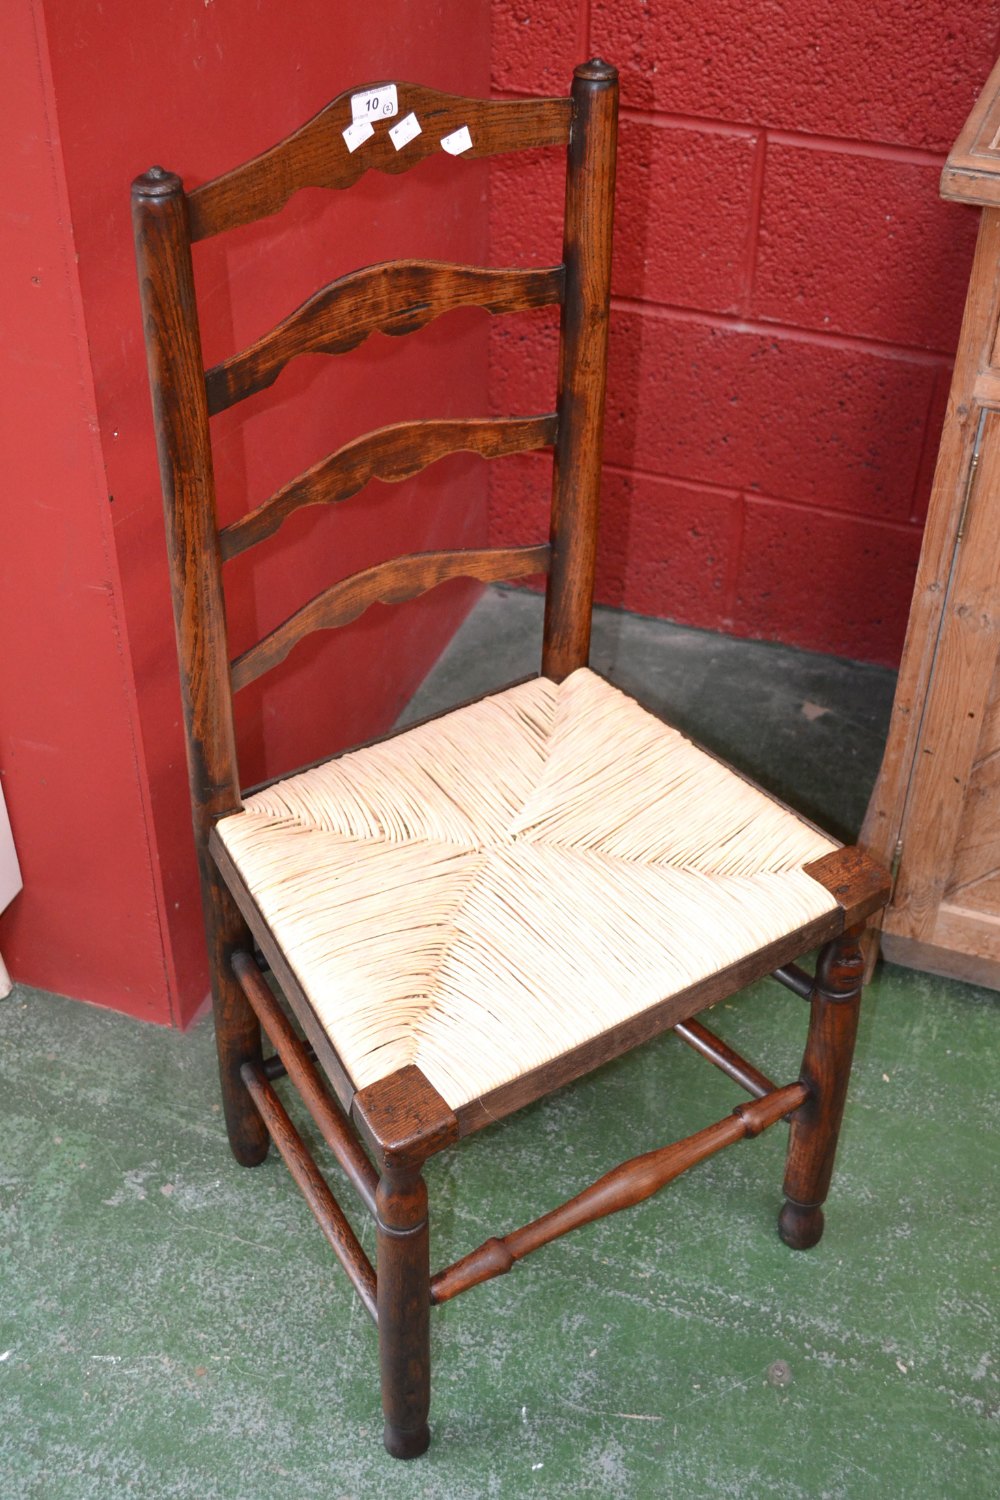 A lath back back country kitchen chair with rush seating, and another